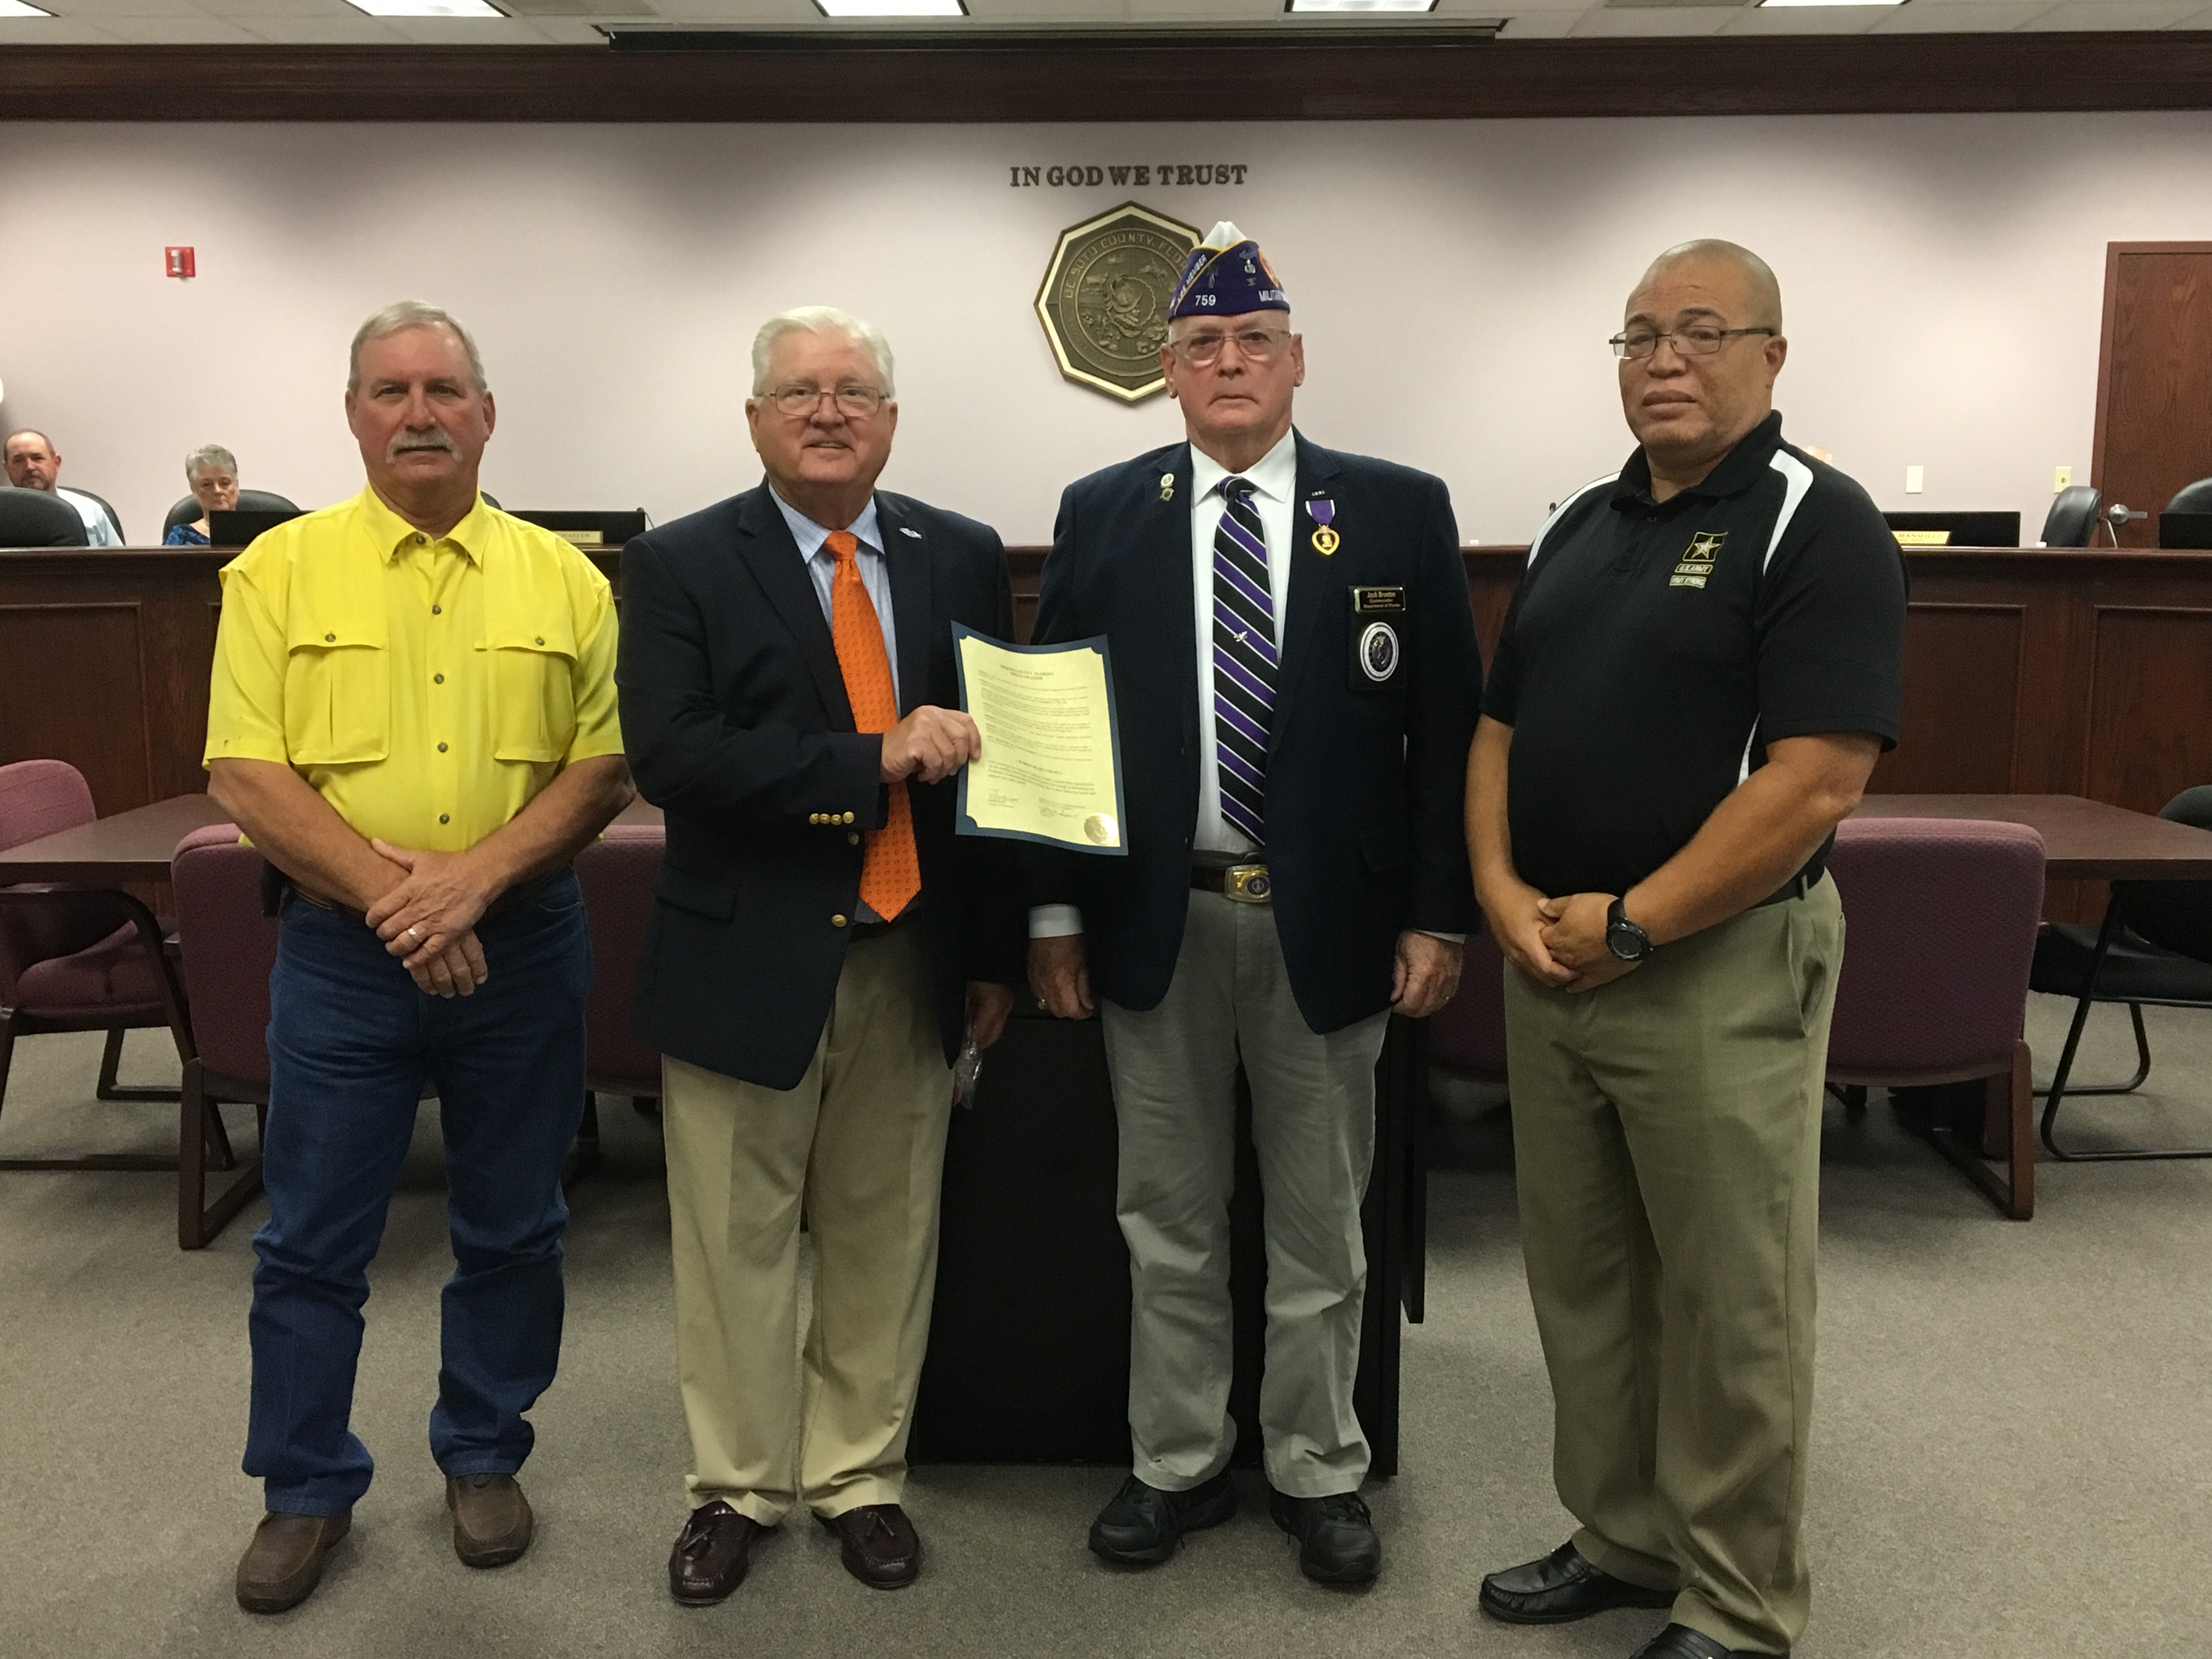 Commissioners Selph and Mansfield along with Veterans Service Officer Steve Rickard and Jack Brunton, Jr.